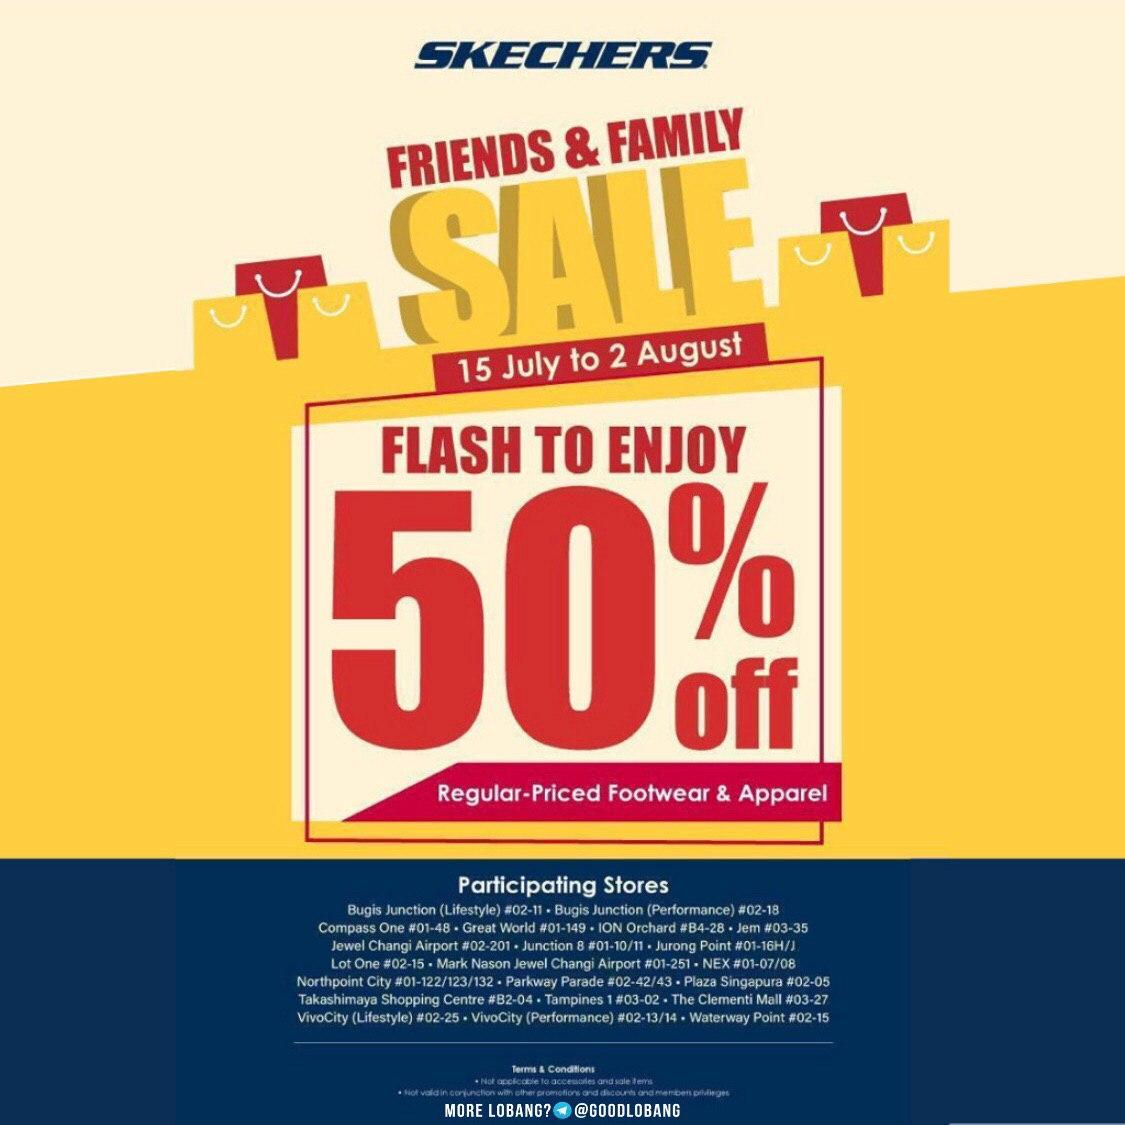 skechers sale 2020 - flash this image to enjoy 50% off.